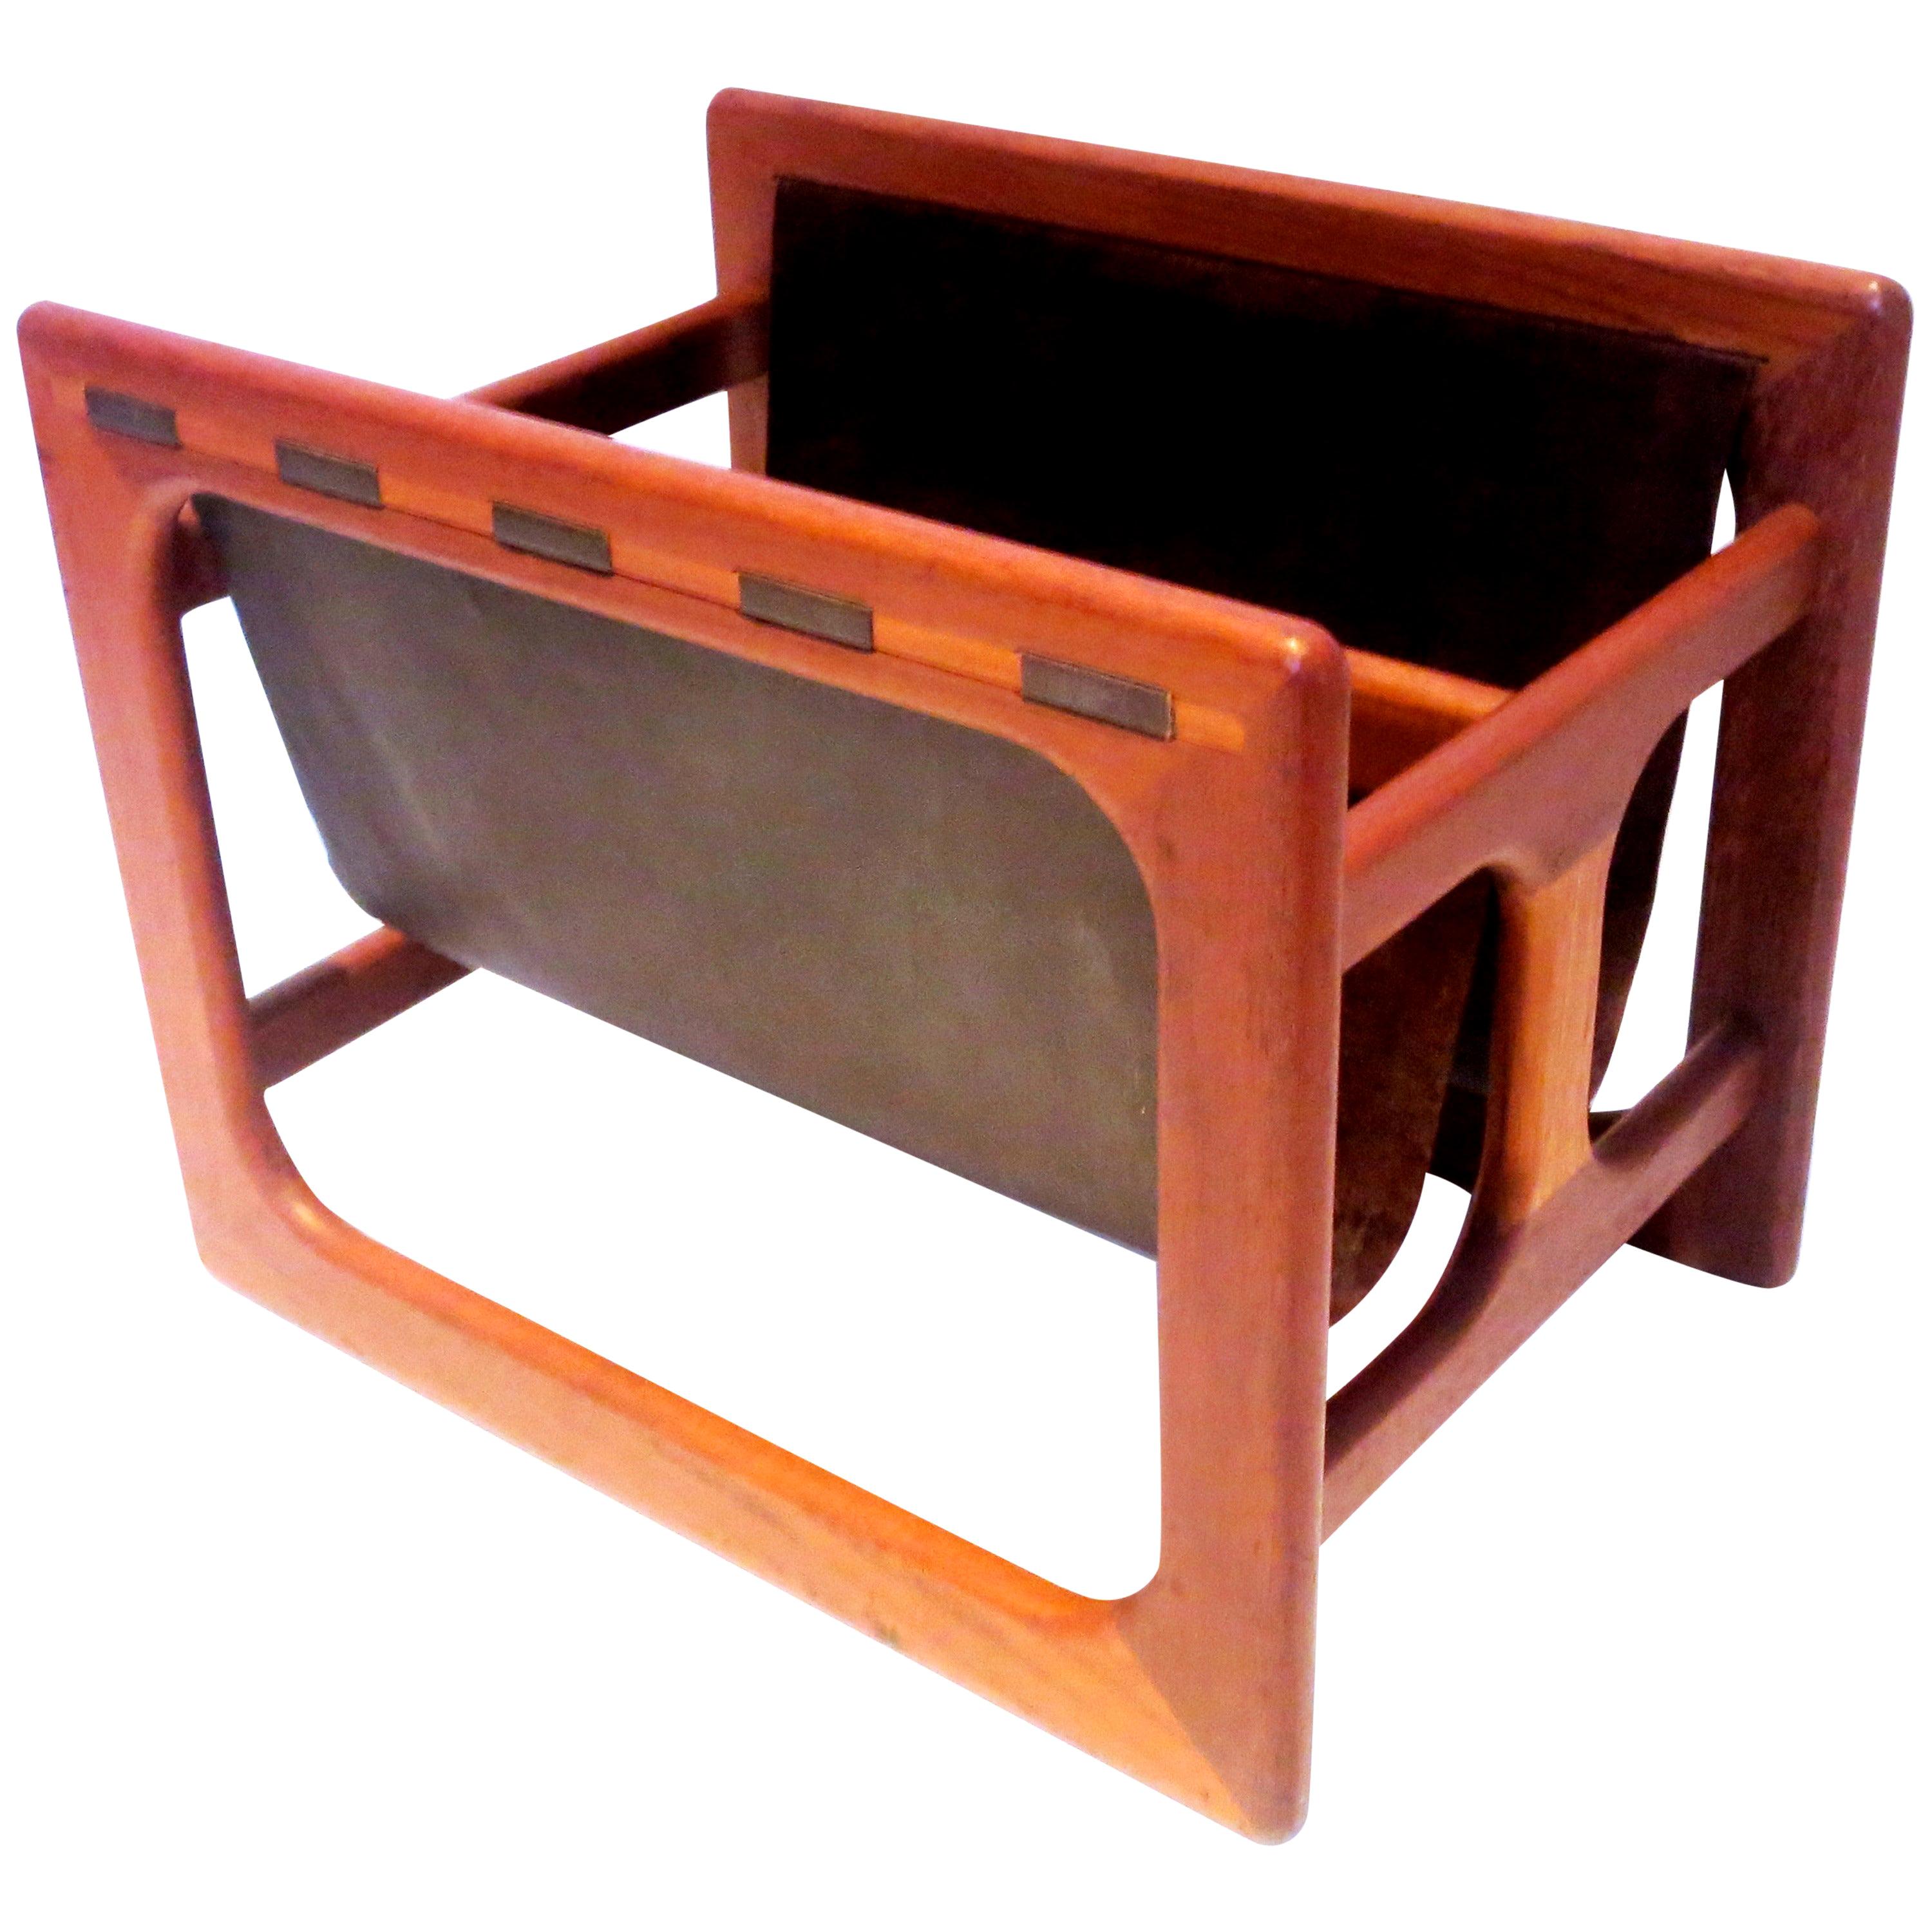 Danish Modern Leather and Teak Sculpted Double Magazine Rack For Sale